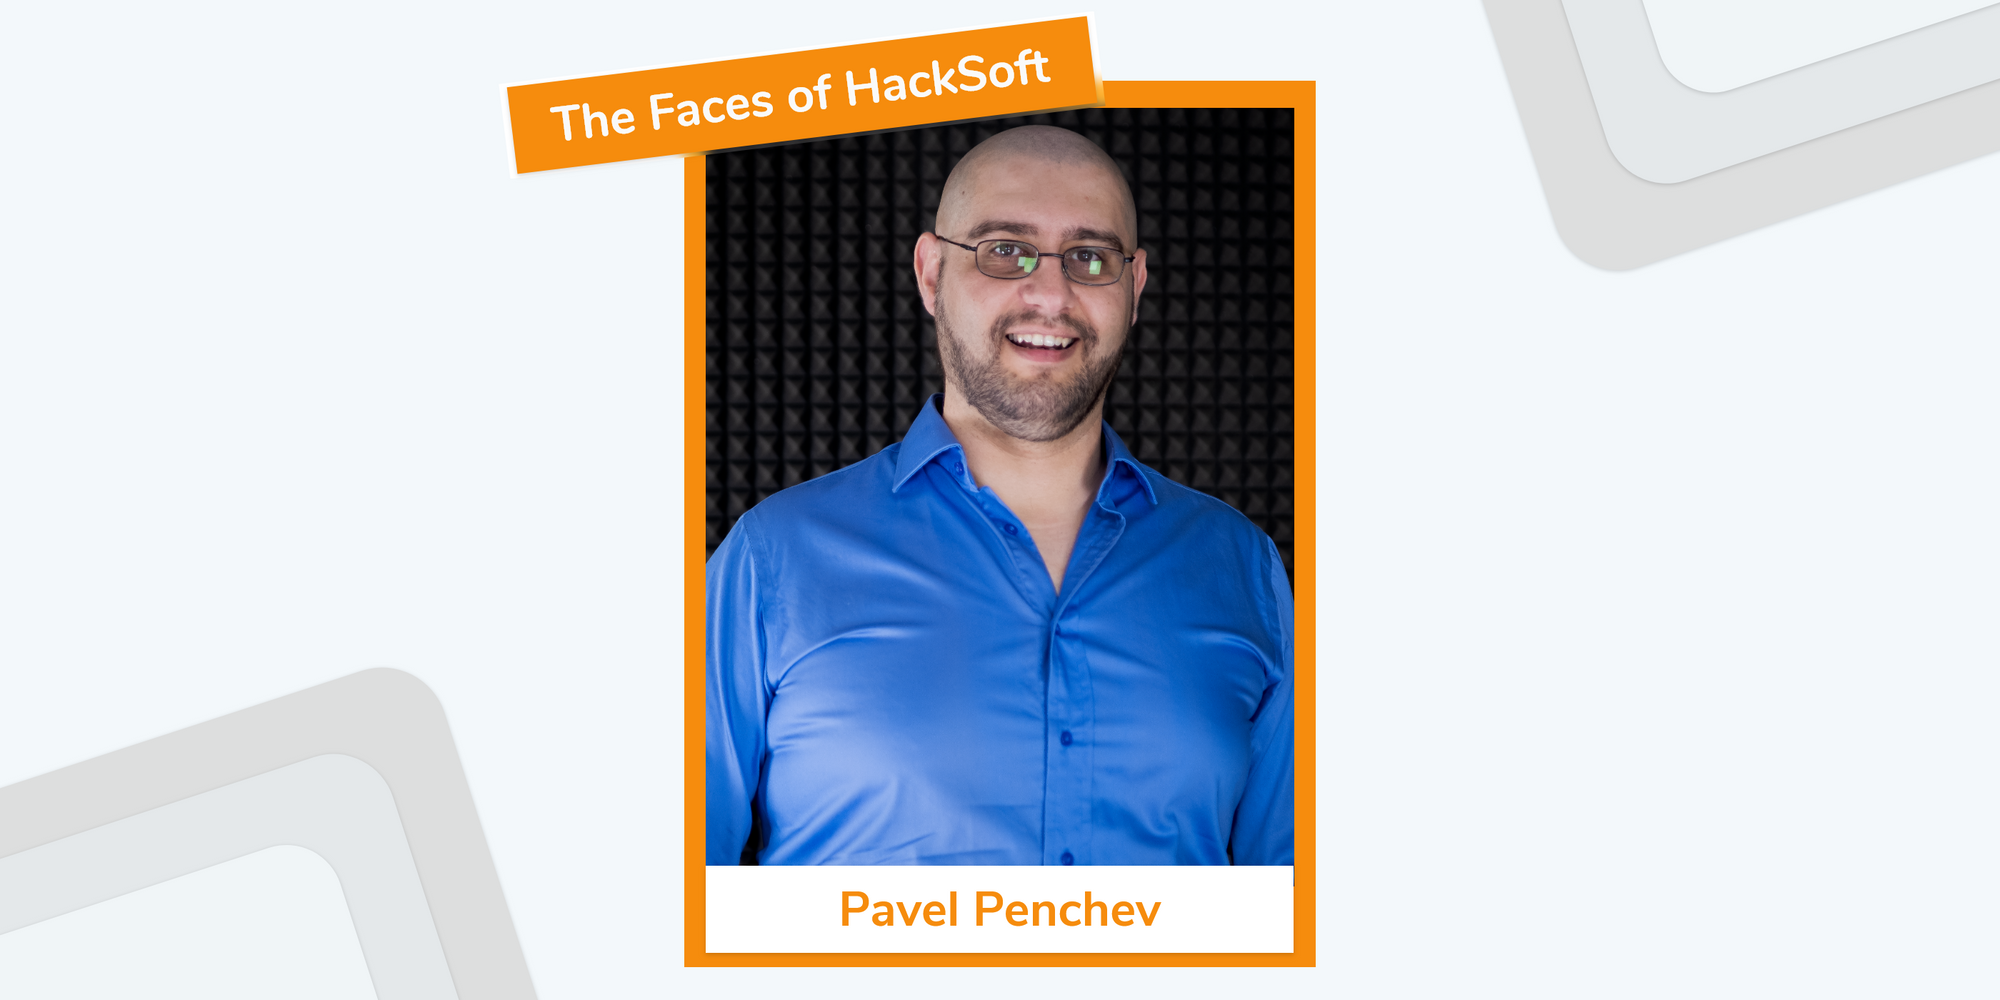 The Faces of HackSoft - Pavel Penchev